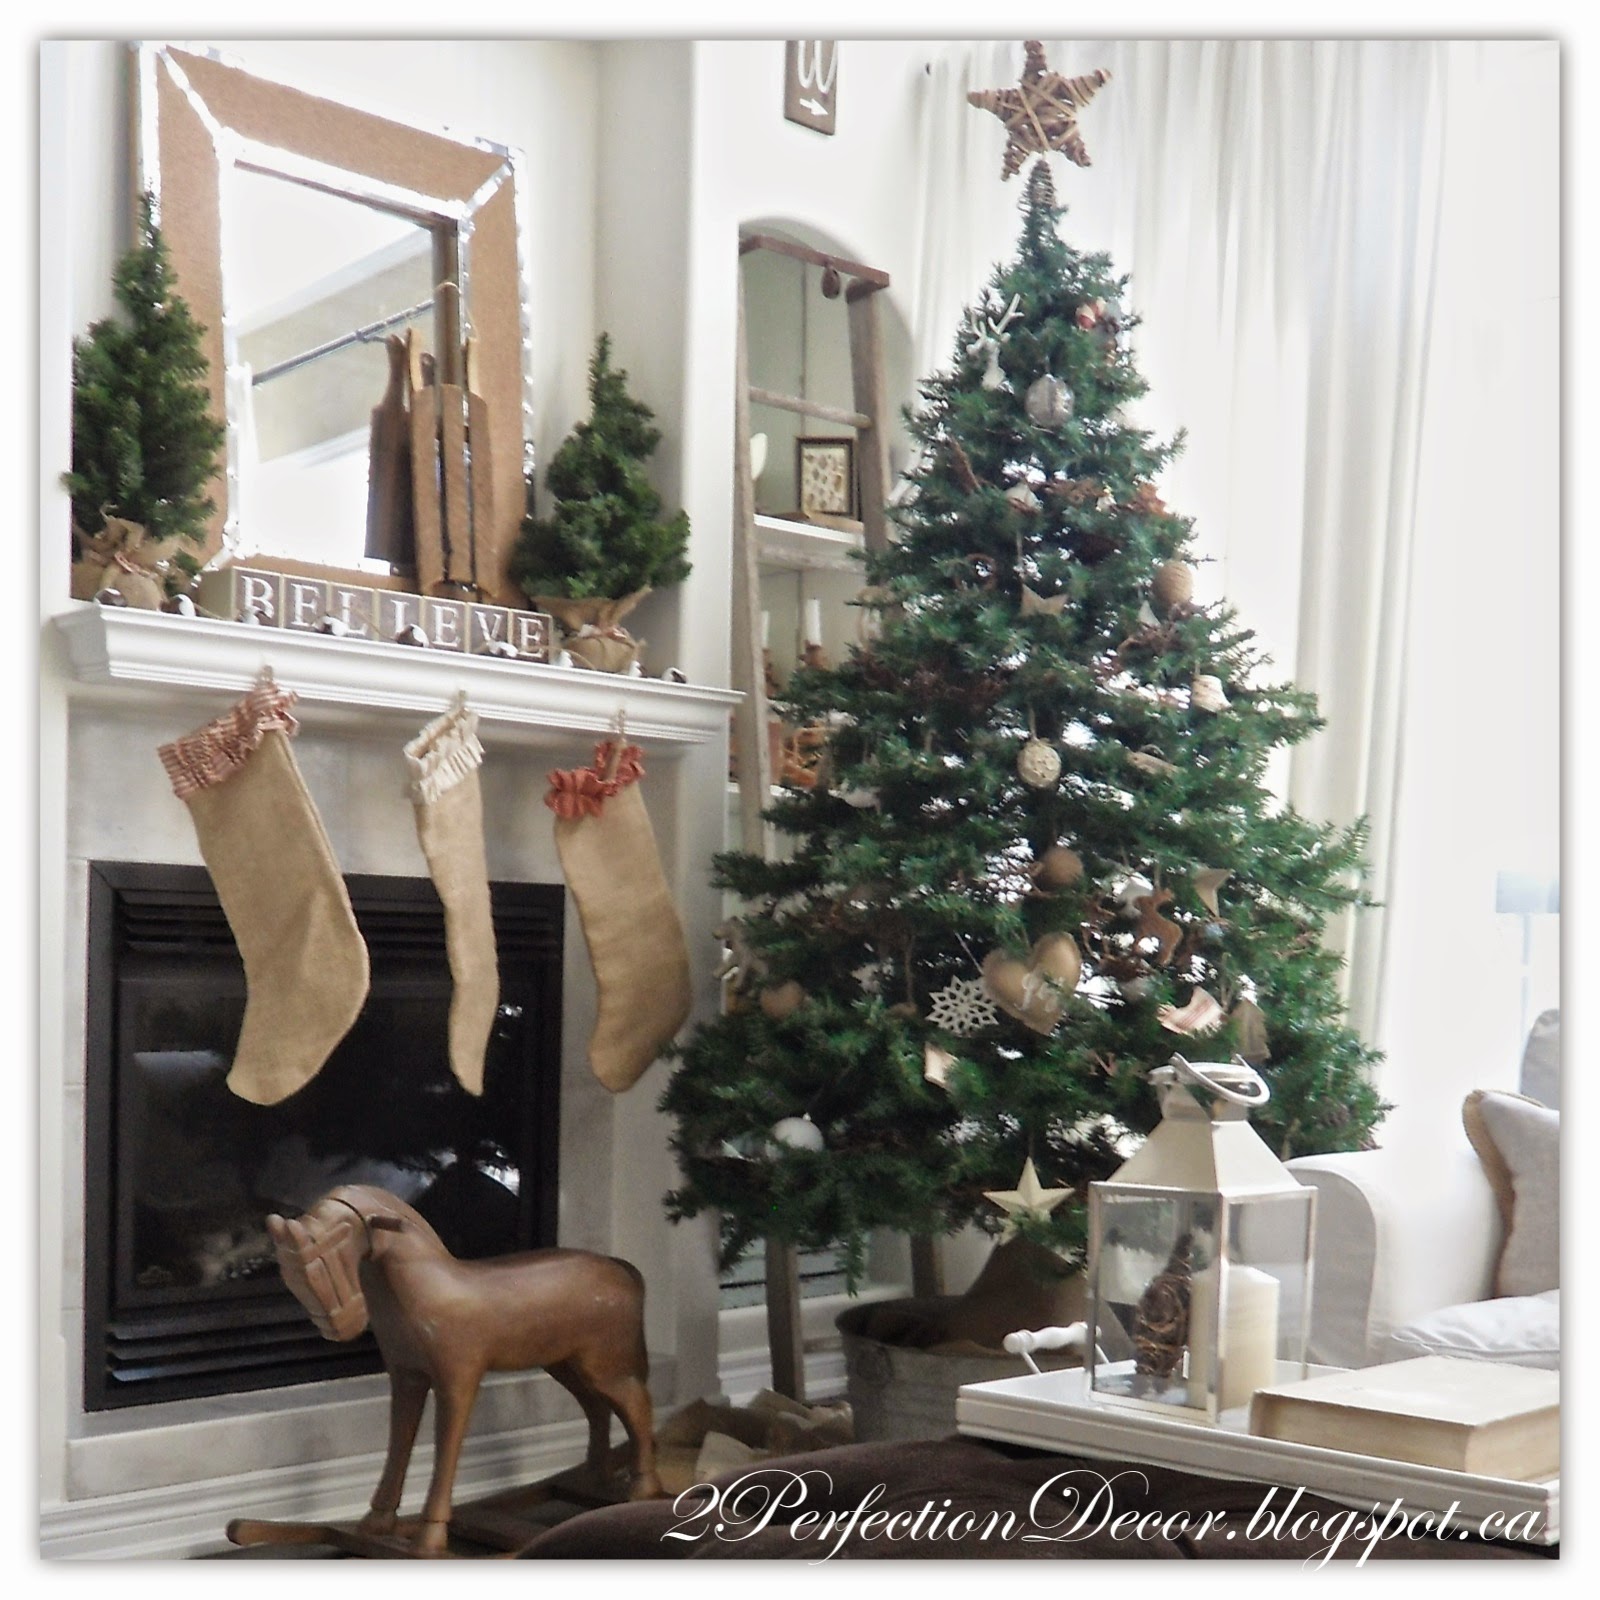 2 Perfection Decor- Jute Ribbon Christmas Tree-Treasure Hunt Thursday- From My Front Porch To Yours